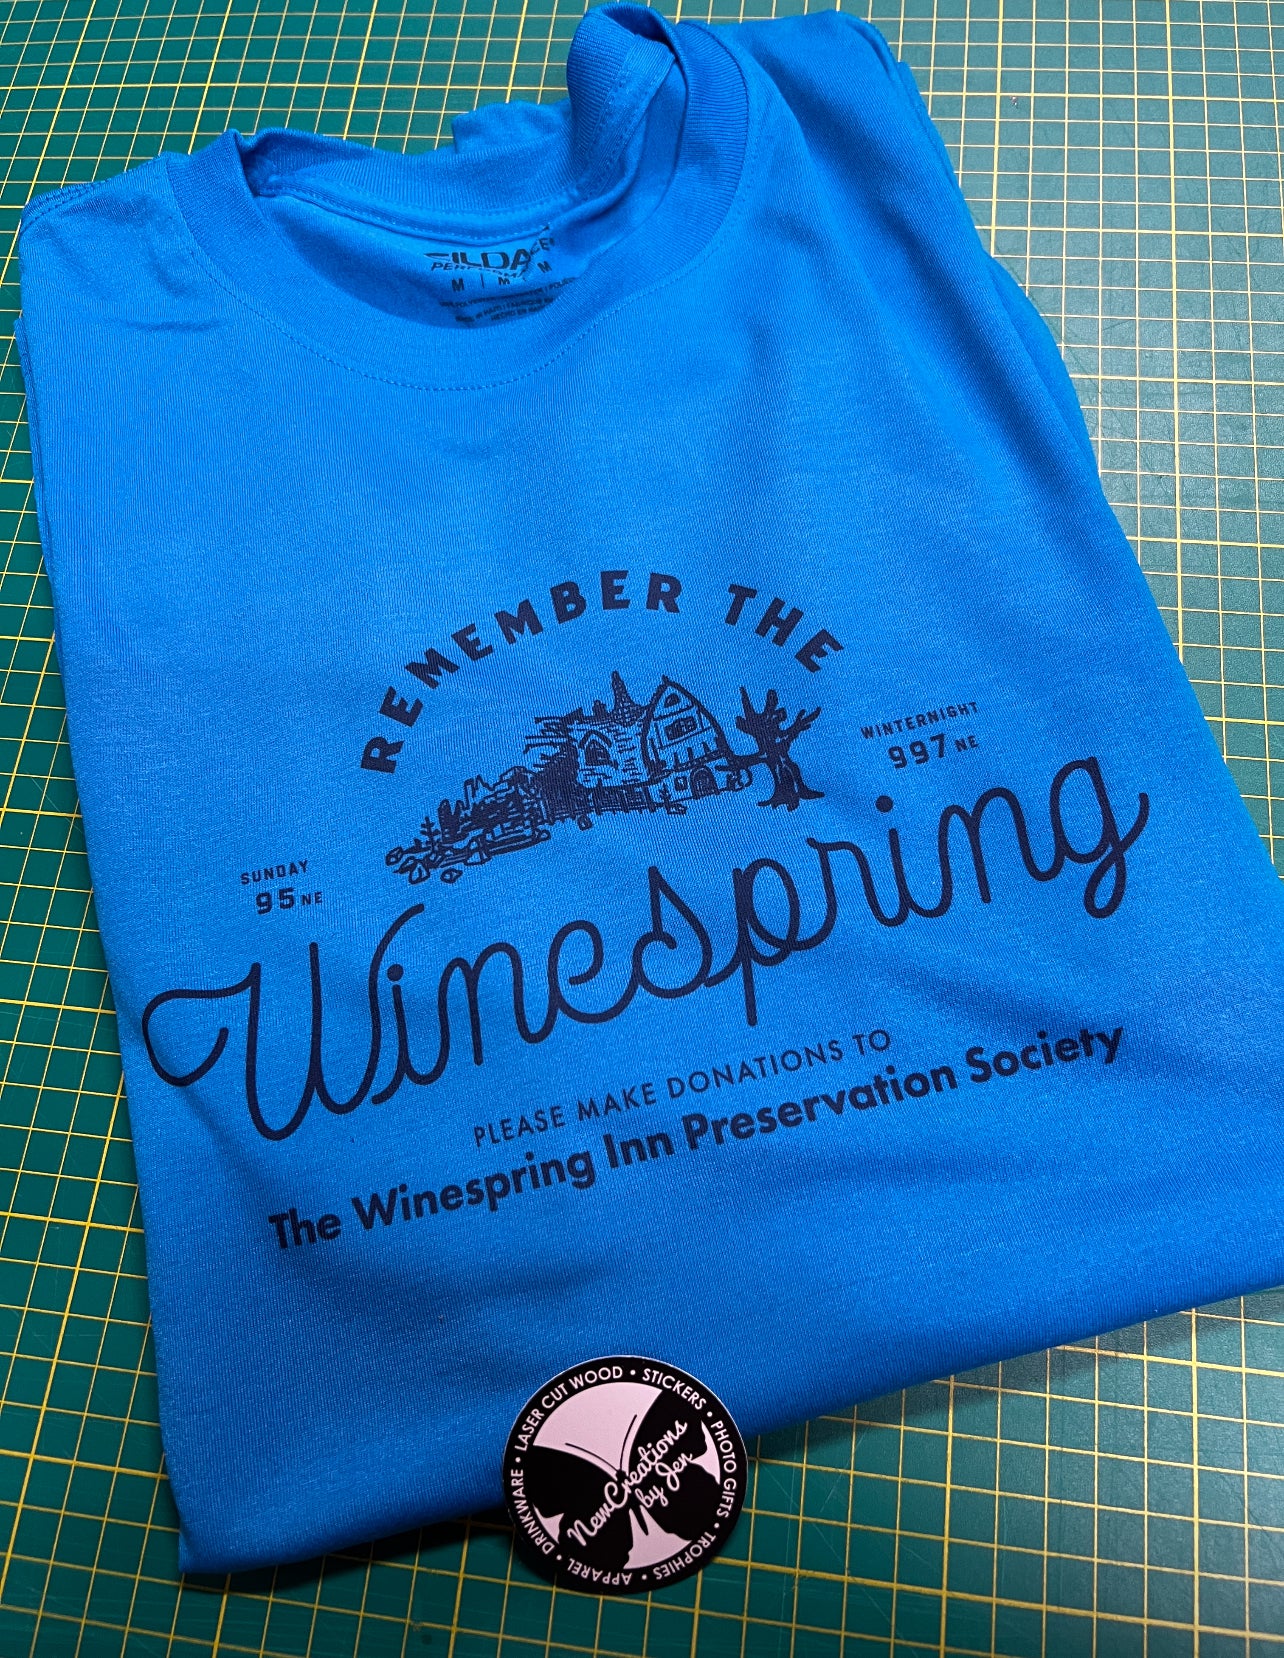 Remember the Winespring - Wheel of Time Inspired  Souvenir Lightweight  Tees